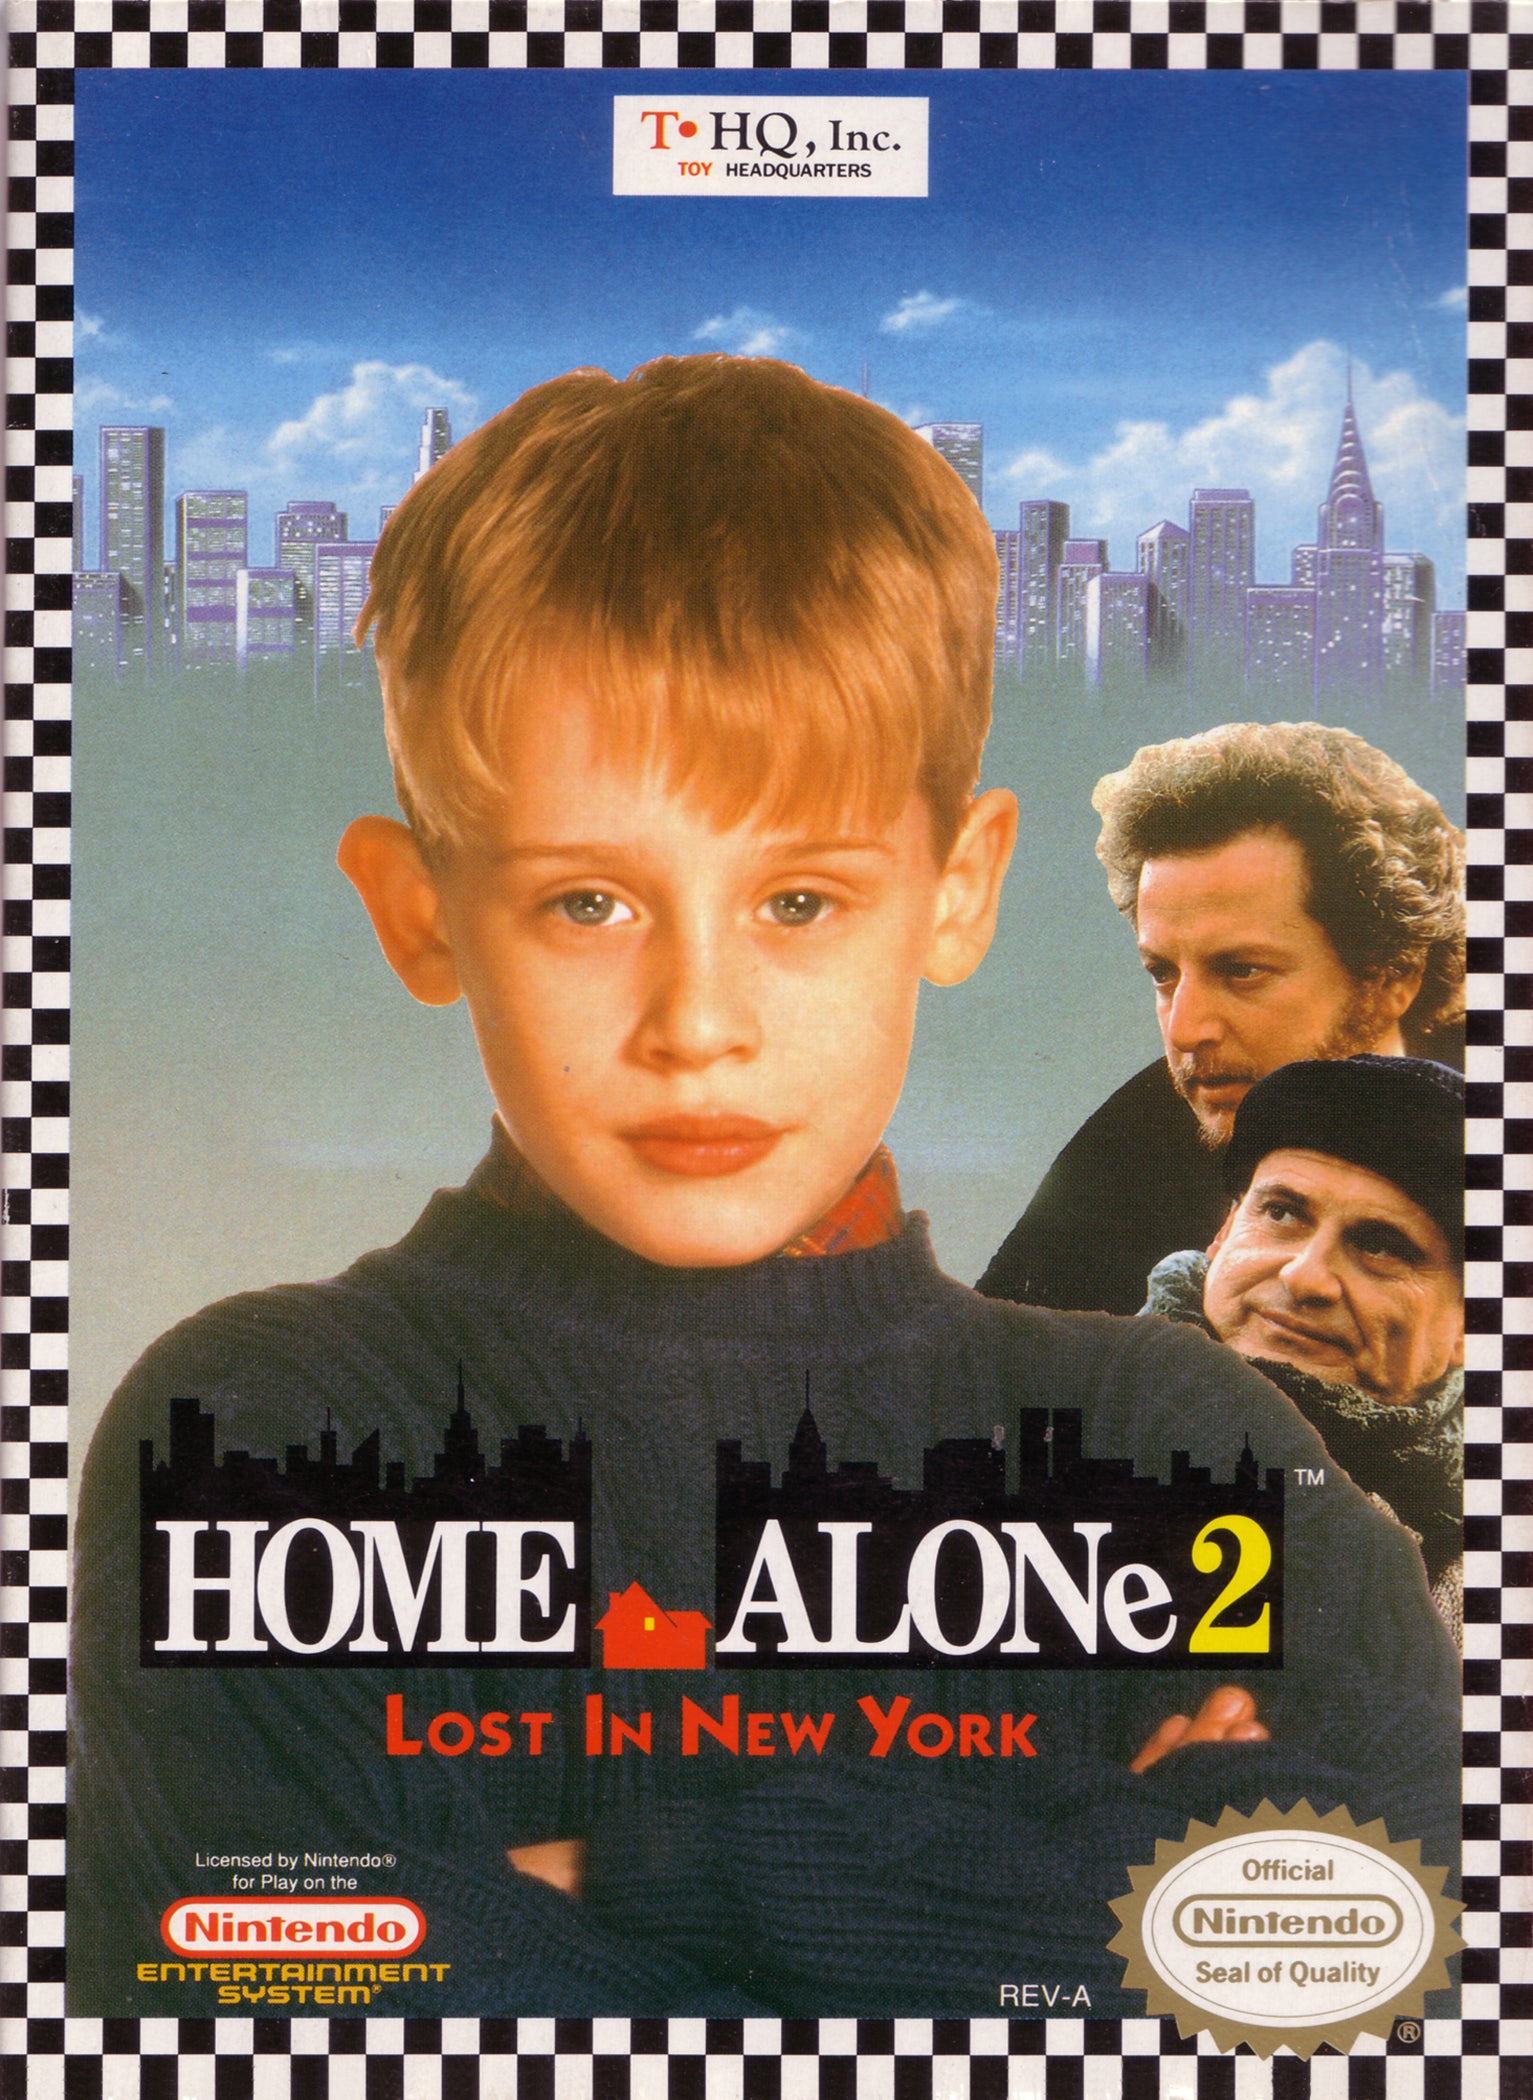 Home Alone 2: Lost in New York - Authentic NES Game Cartridge